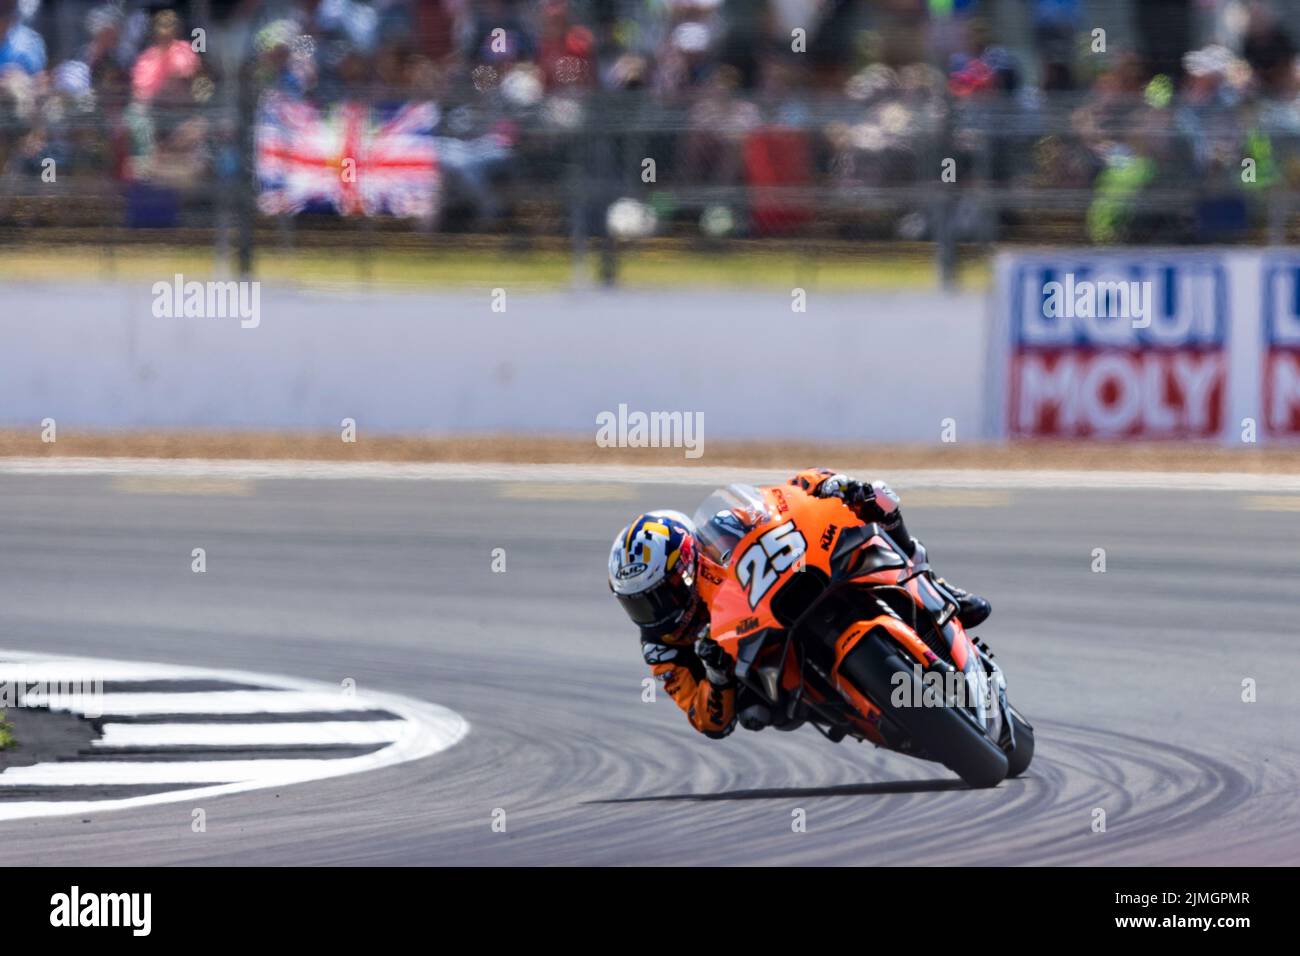 6th August 2022; Silverstone Circuit, Silverstone, Northamptonshire, England: British MotoGP Grand Prix, Qualifying: Number 25 Tech3 KTM Factory Racing bike ridden by Raul Fernandez during qualifying at the British MotoGP Stock Photo